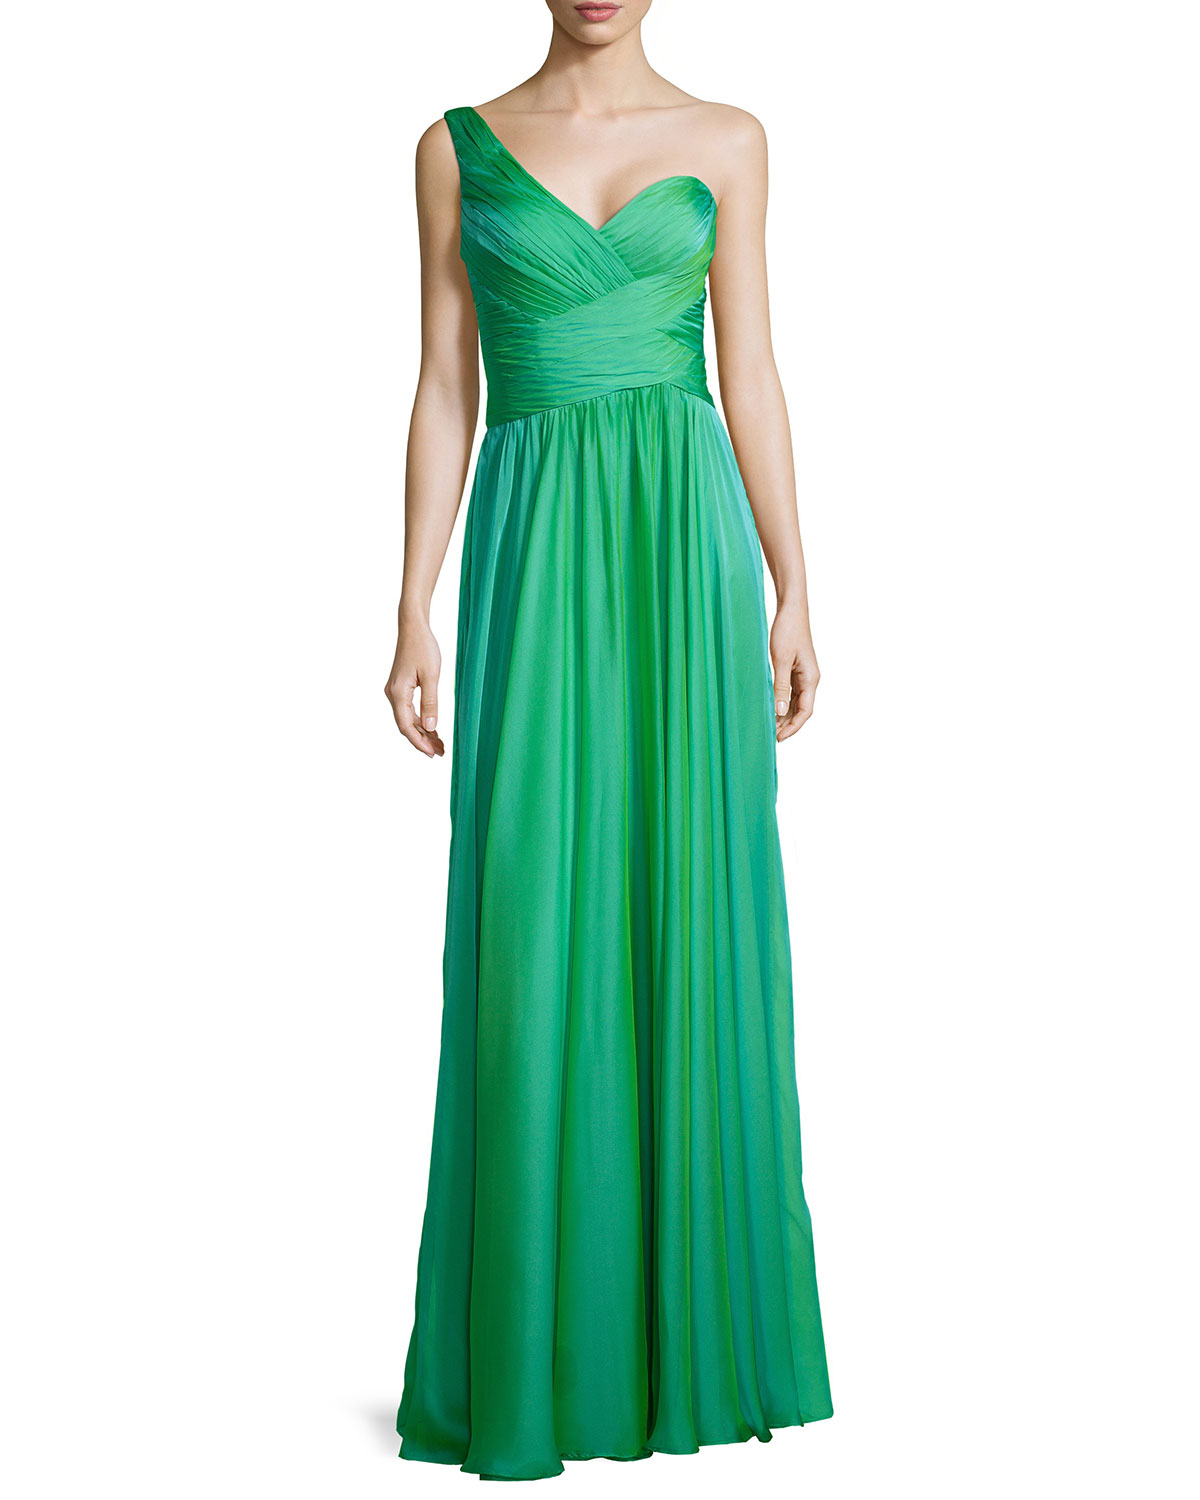 Lyst - La Femme Ruched One-shoulder Gown in Green